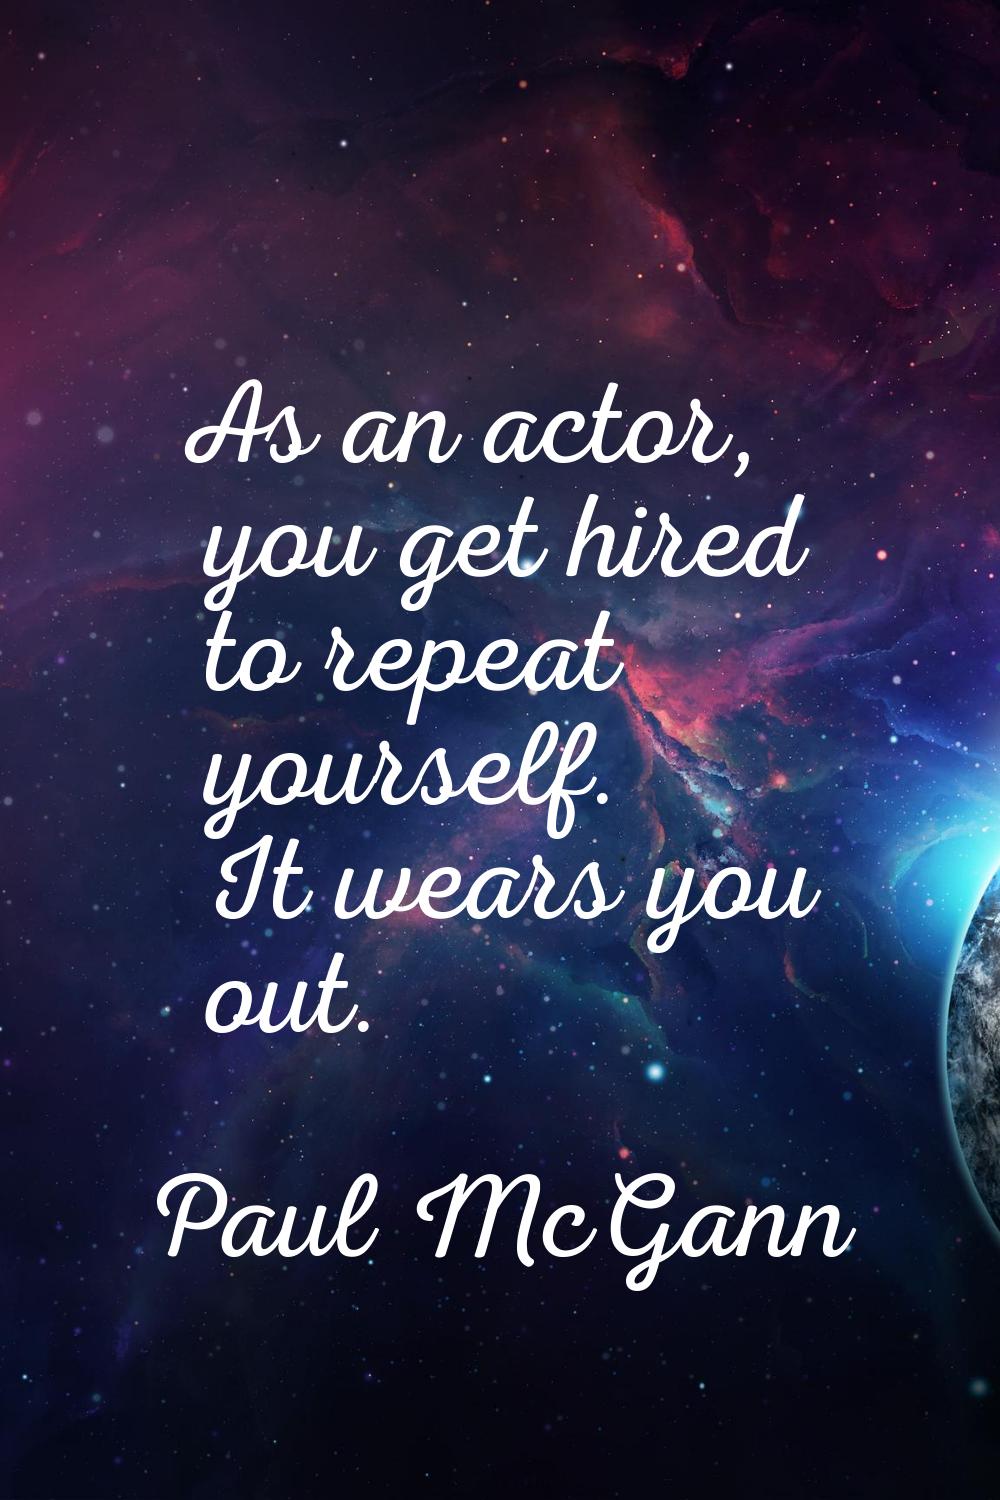 As an actor, you get hired to repeat yourself. It wears you out.